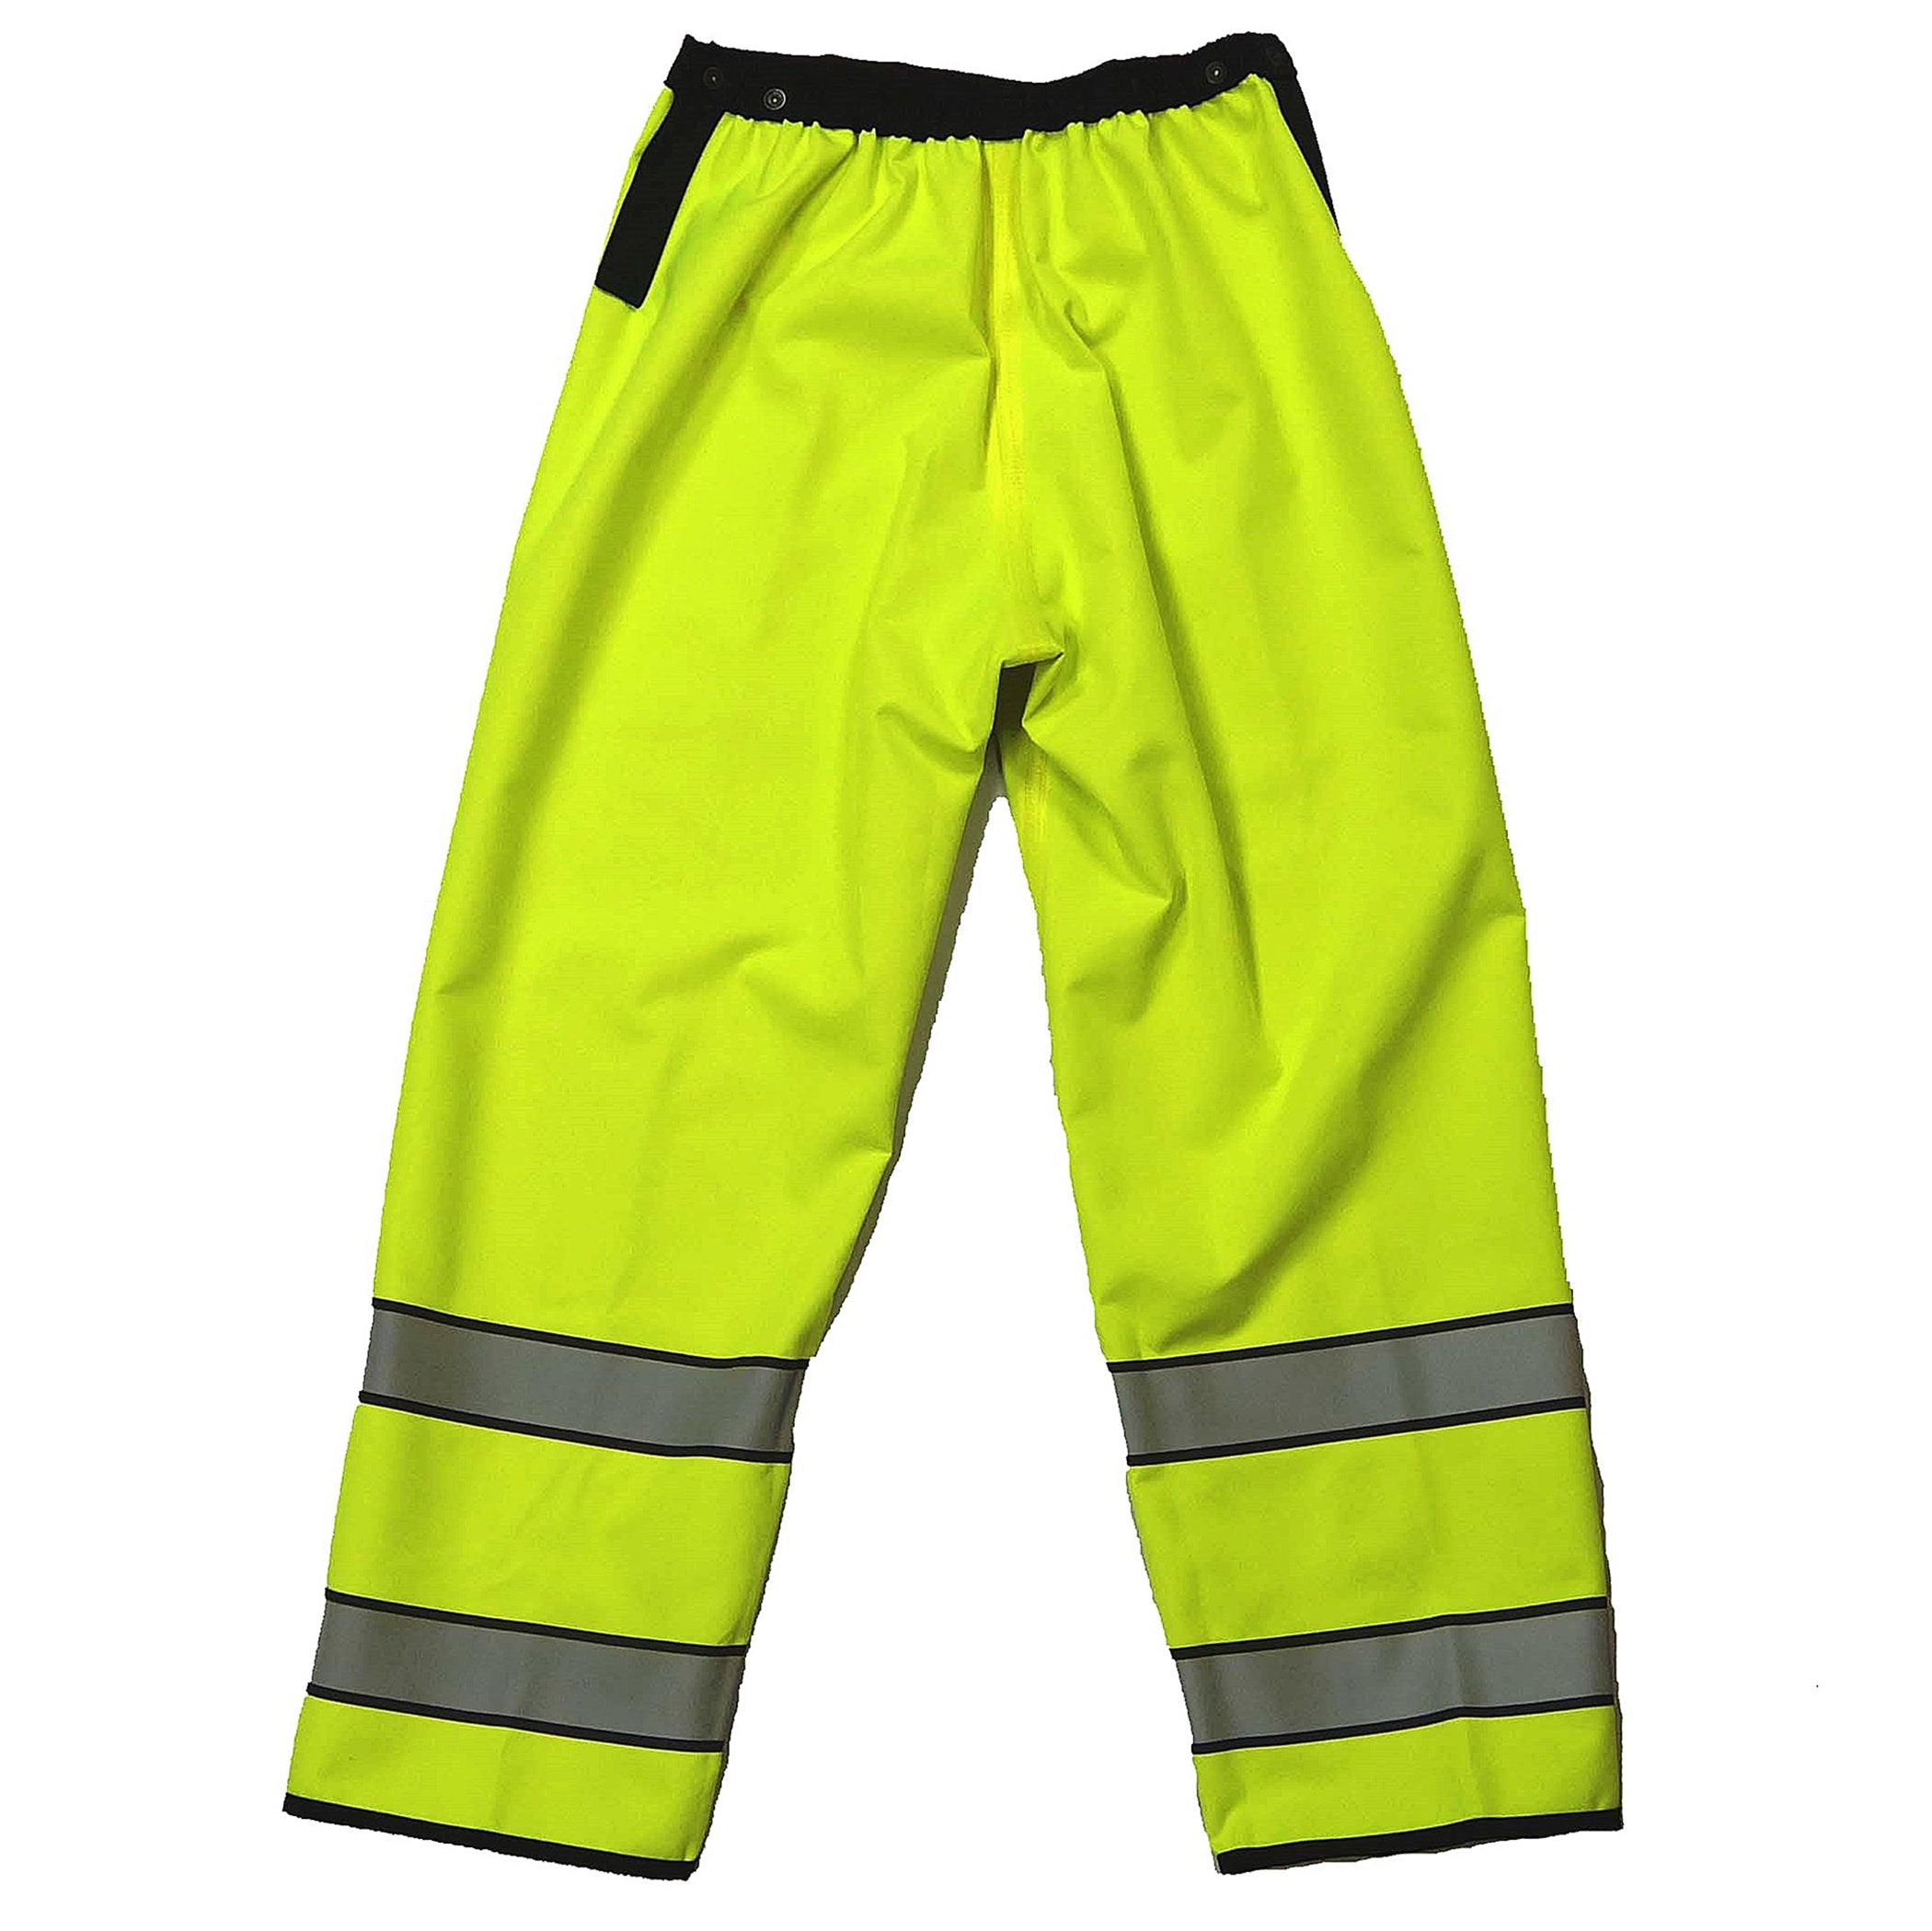 Neese 5010RPT3M Reversible Police Trouser with 3M Reflective Taping